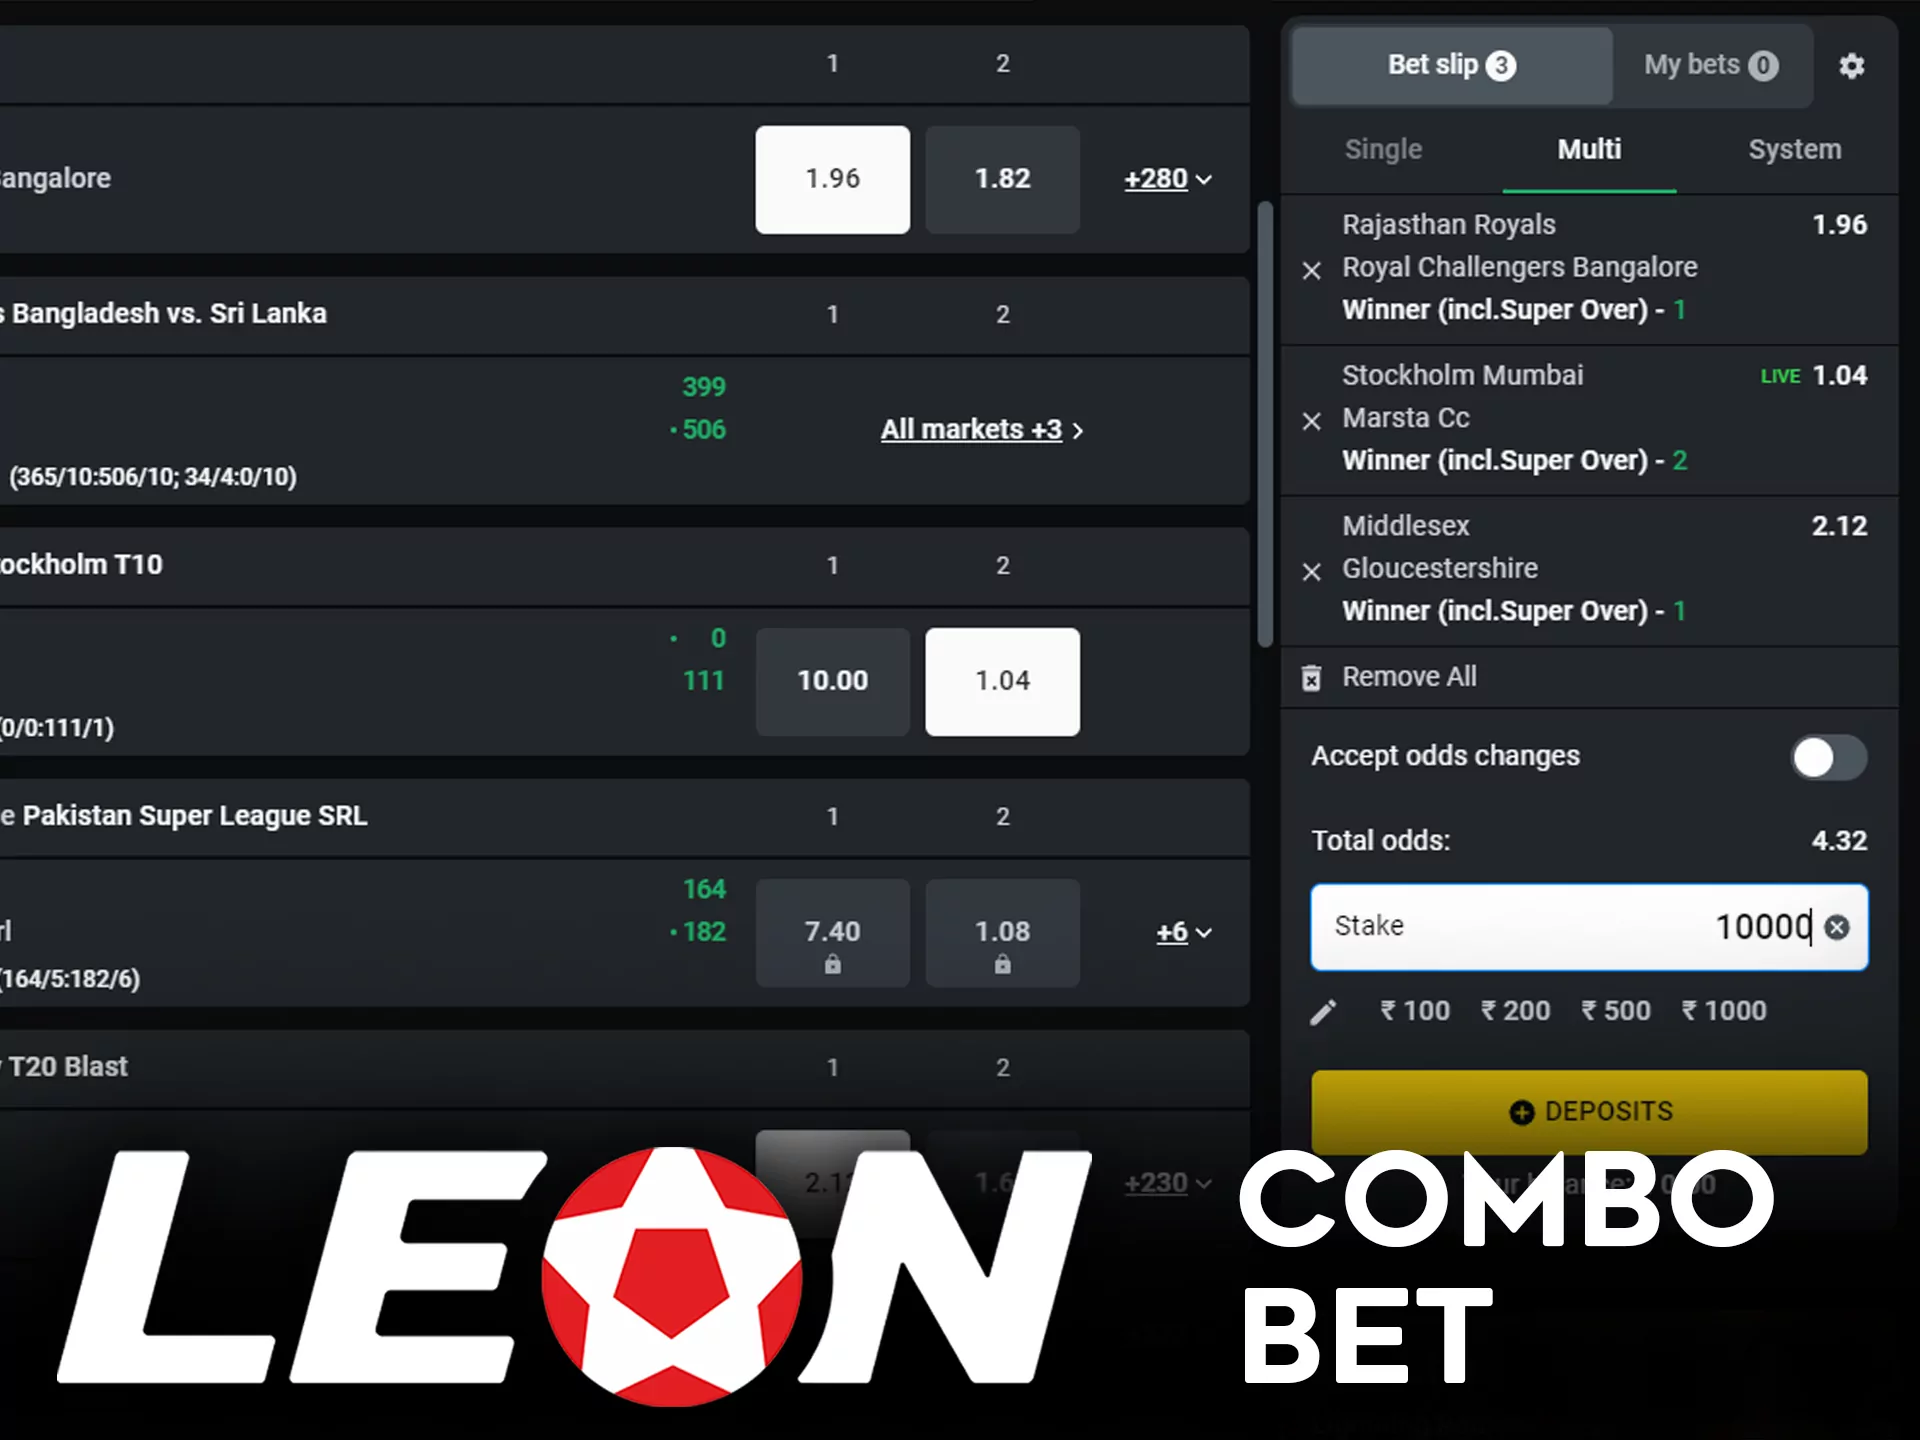 Place combo bets in the Leon Bet sportsbook.